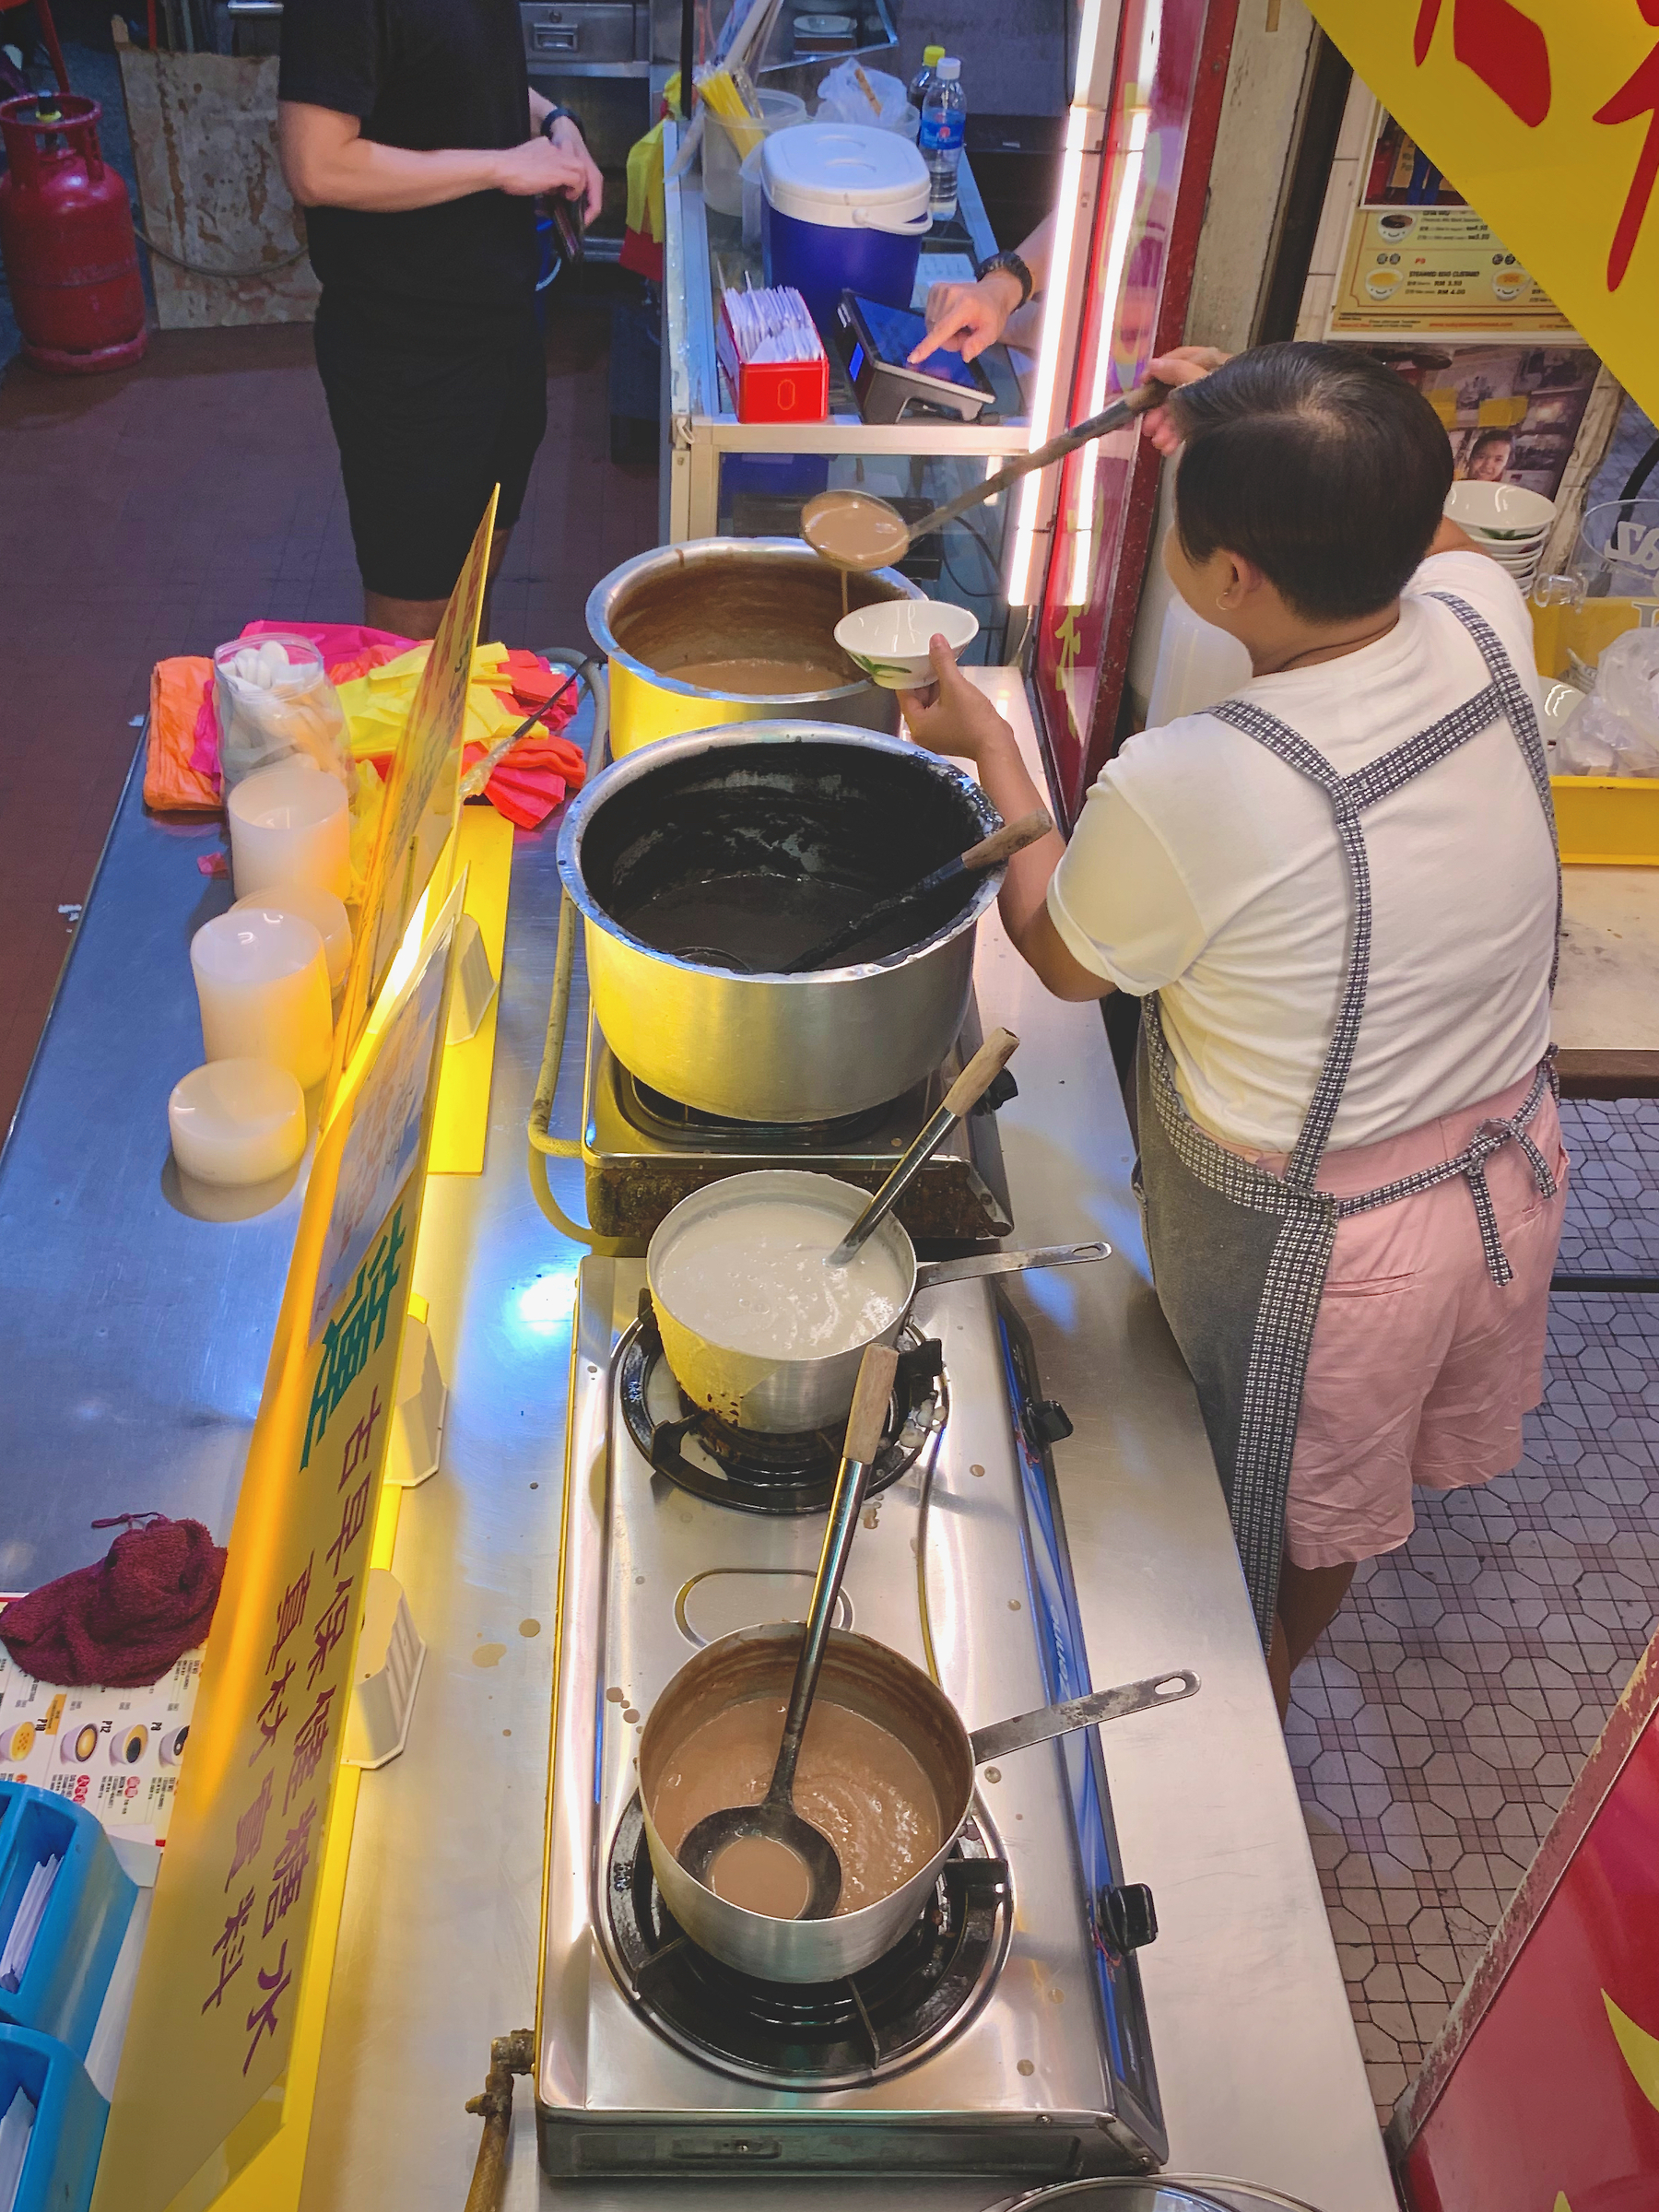 A man tending to the warm pots of desserts